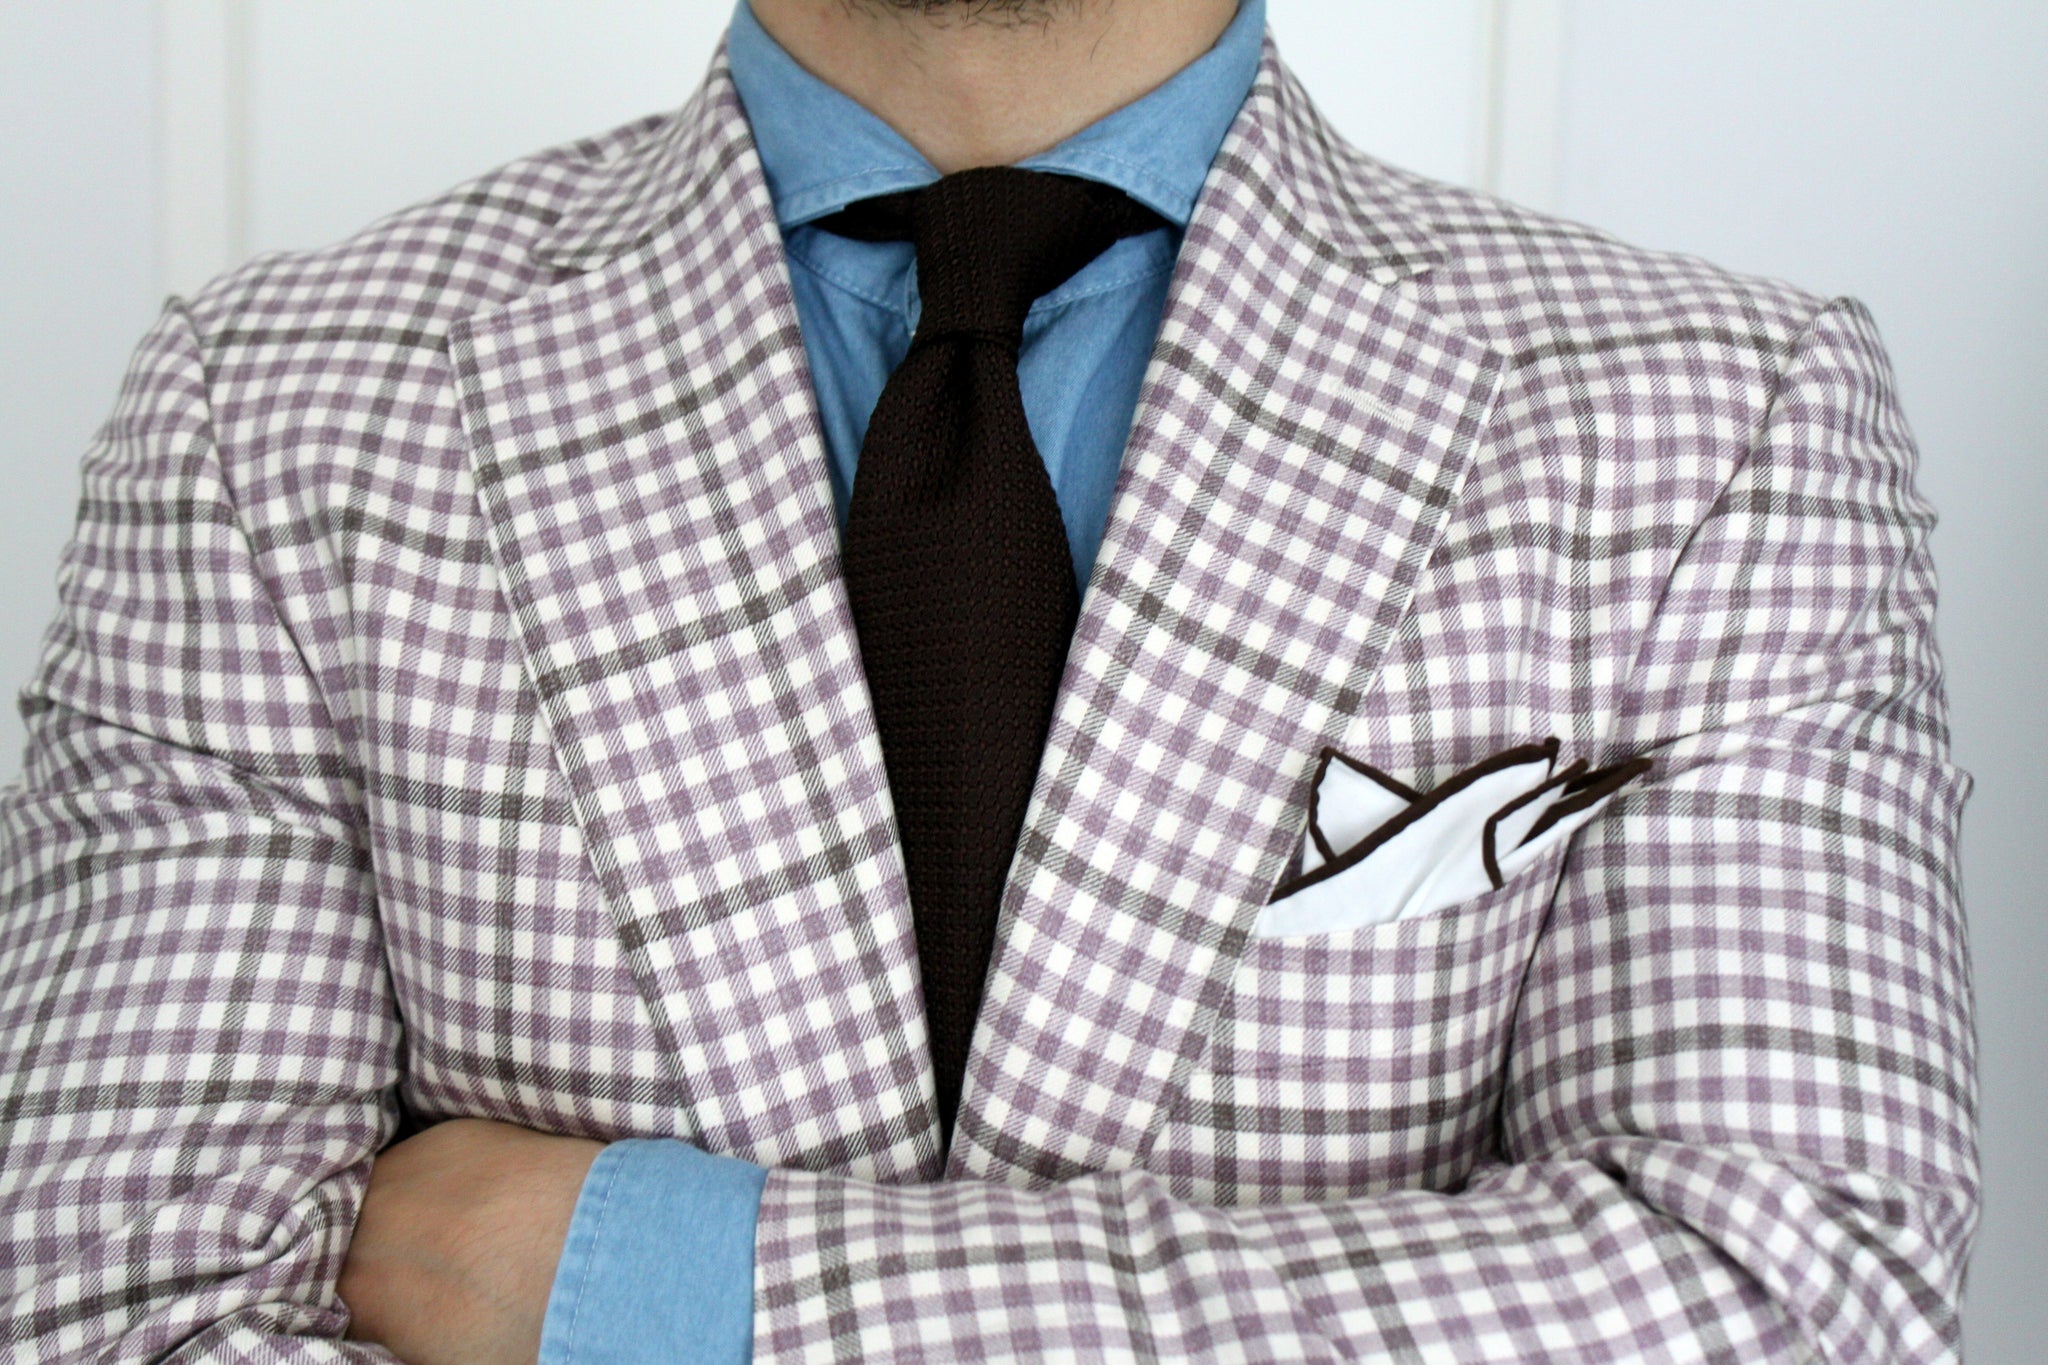 Checked sport coat and details